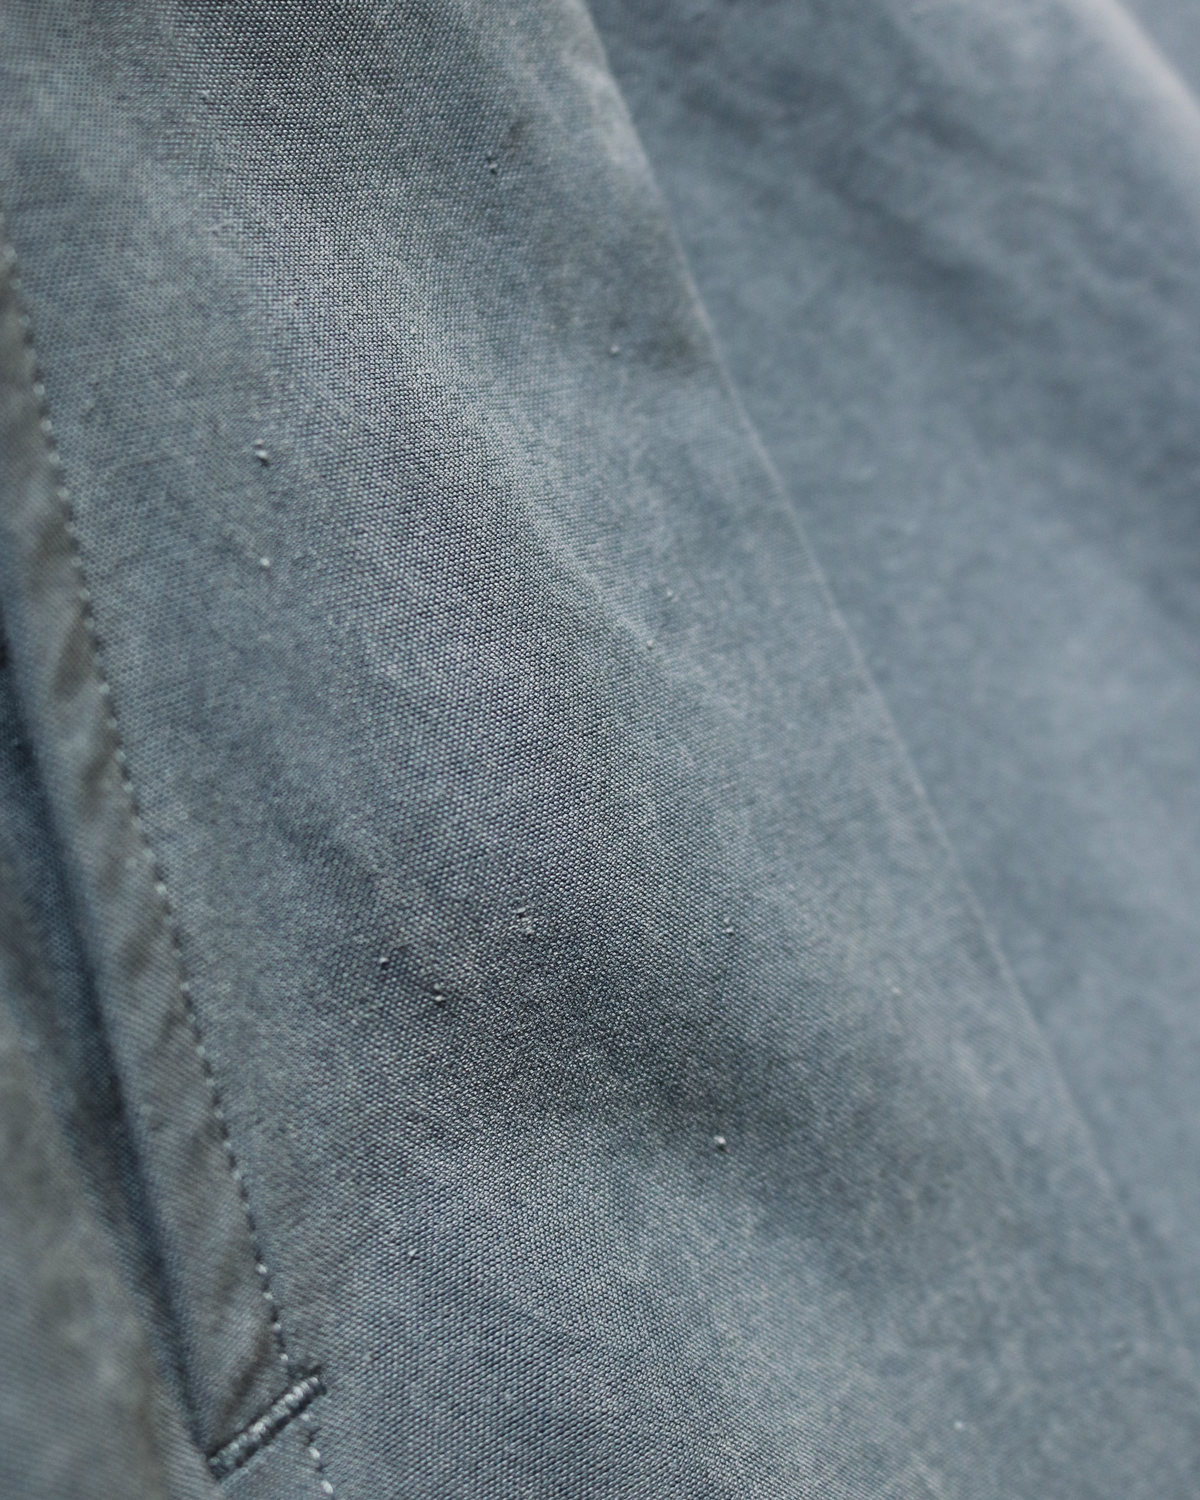 NEAT｜CELLULOSE NIDOM｜WIDE - Blue Gray｜PRODUCT｜Continuer Inc